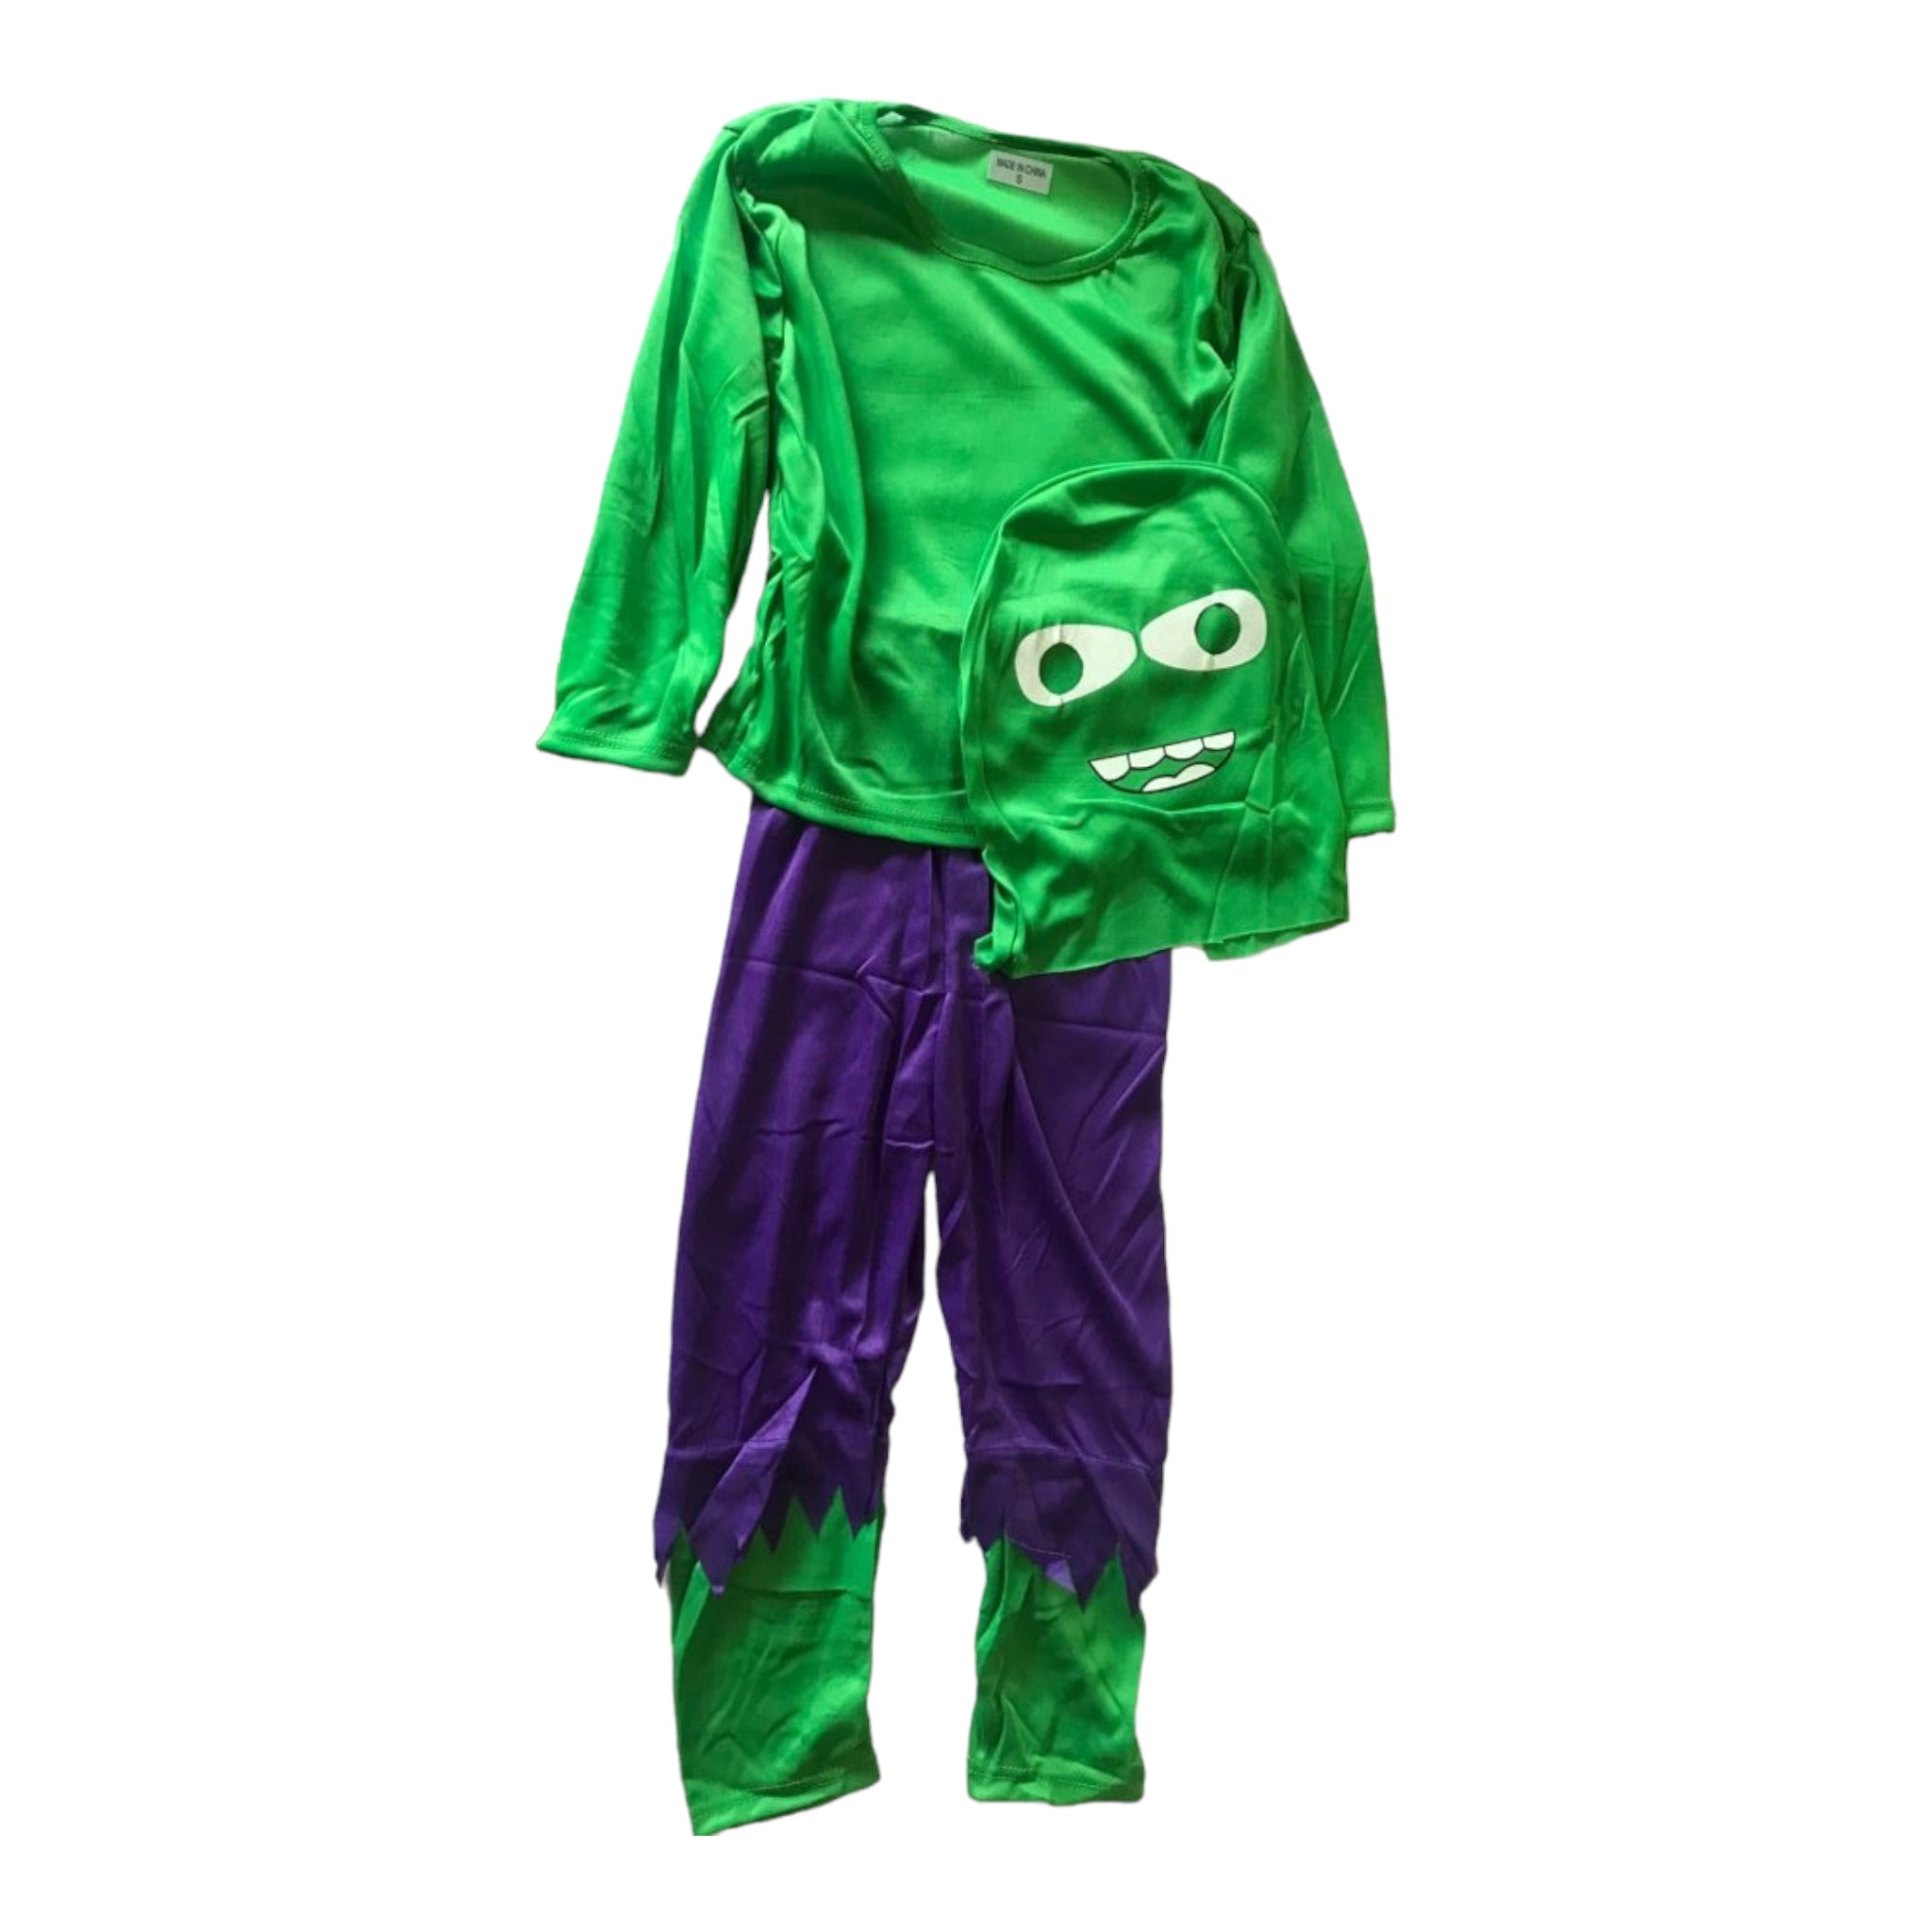 Kids Hulk Party Costume Non-Muscle